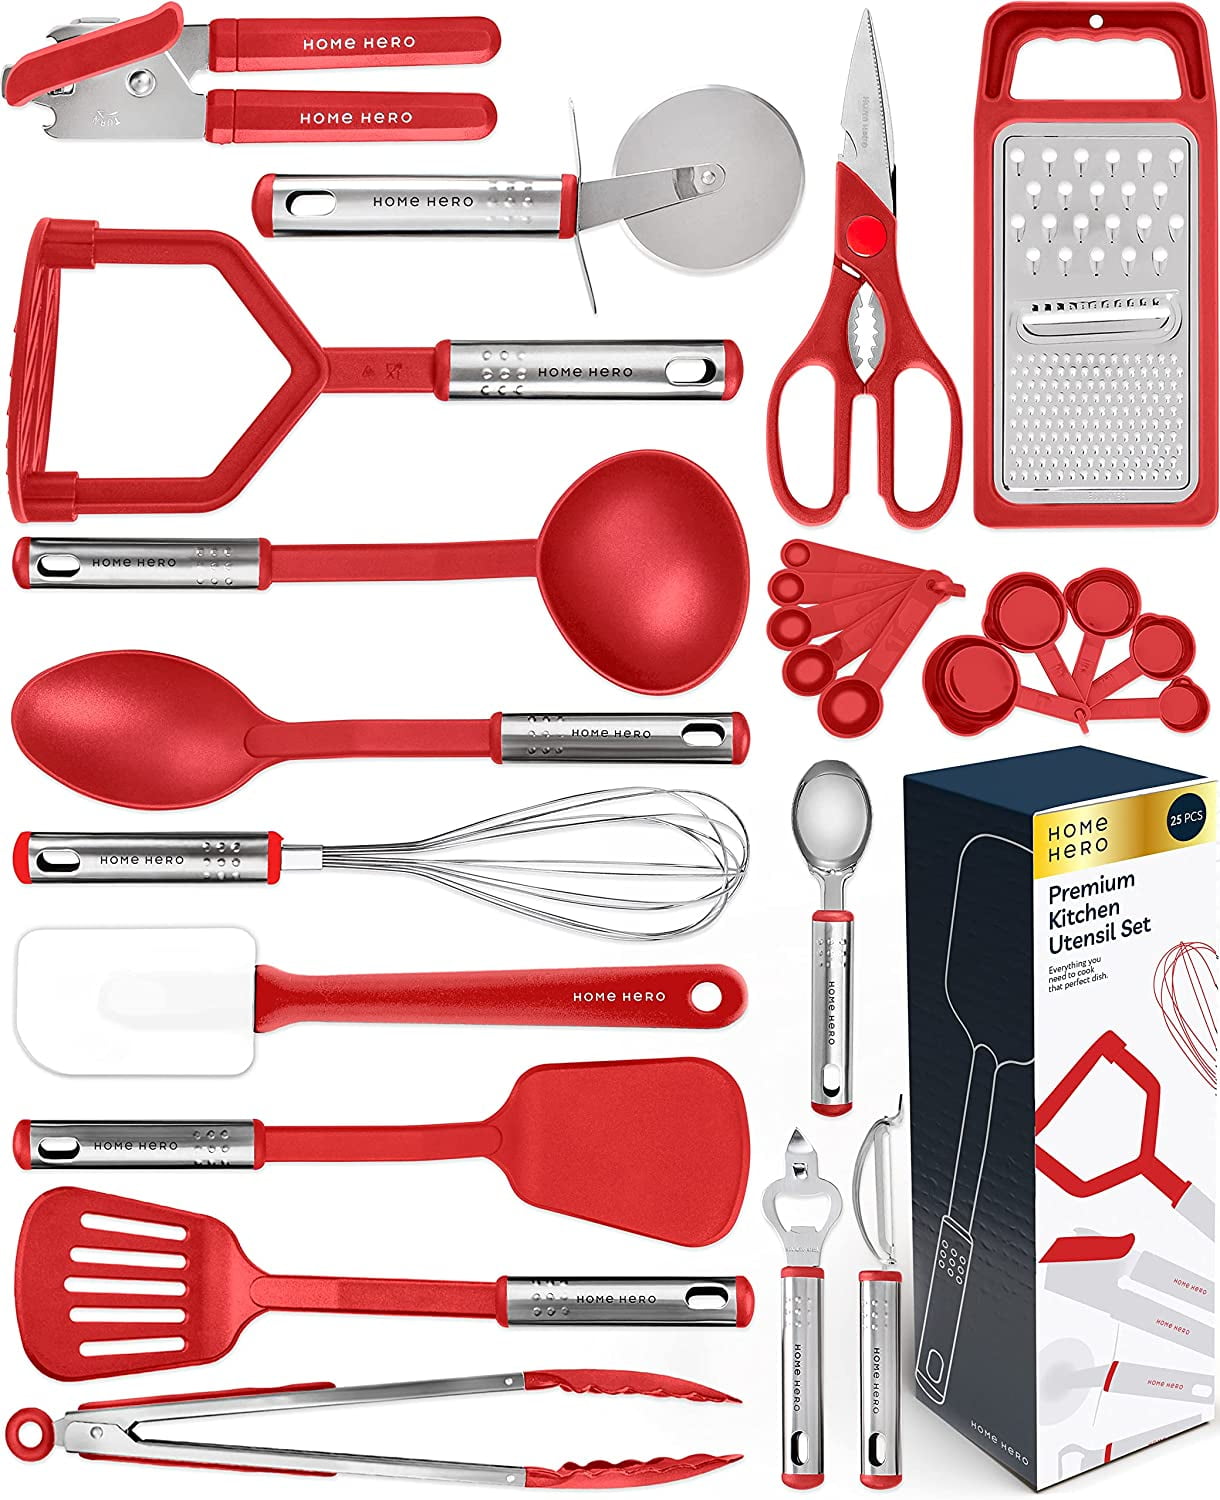 Cooking Utensils Set - 24 Pieces Nylon Kitchen Gadgets, Spatula Set with  Stainless Steel Handles - Heat Resistant Kitchen Utensils Set - Red Kitchen